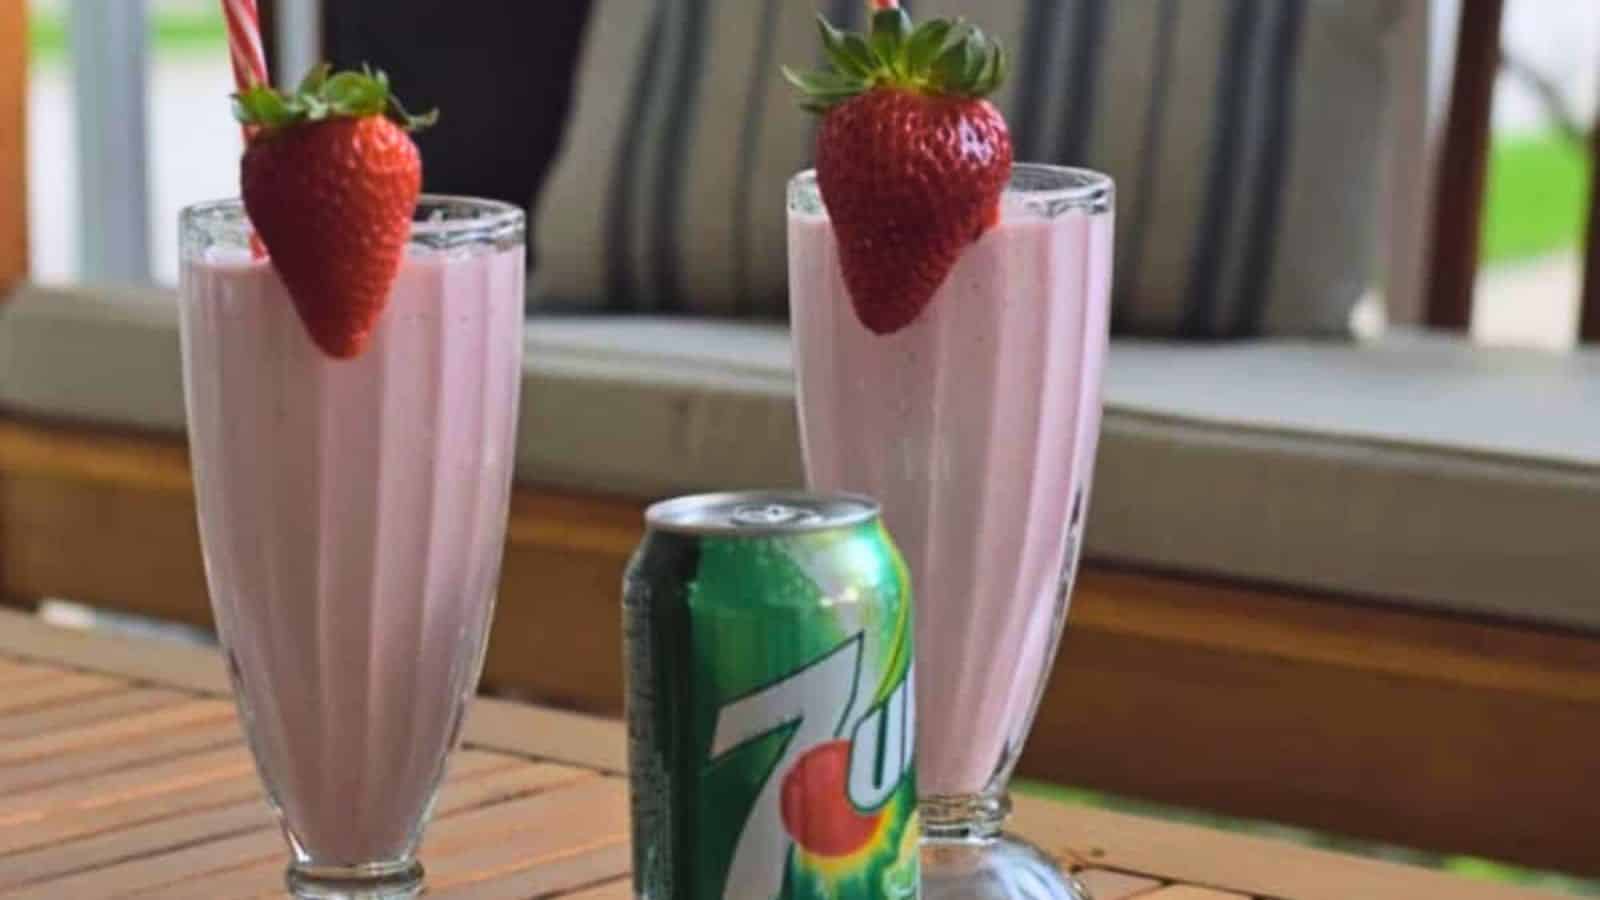 Two milkshake glasses with frozen strawberry lemonade garnished with strawberries sitting on a wooden table outside.